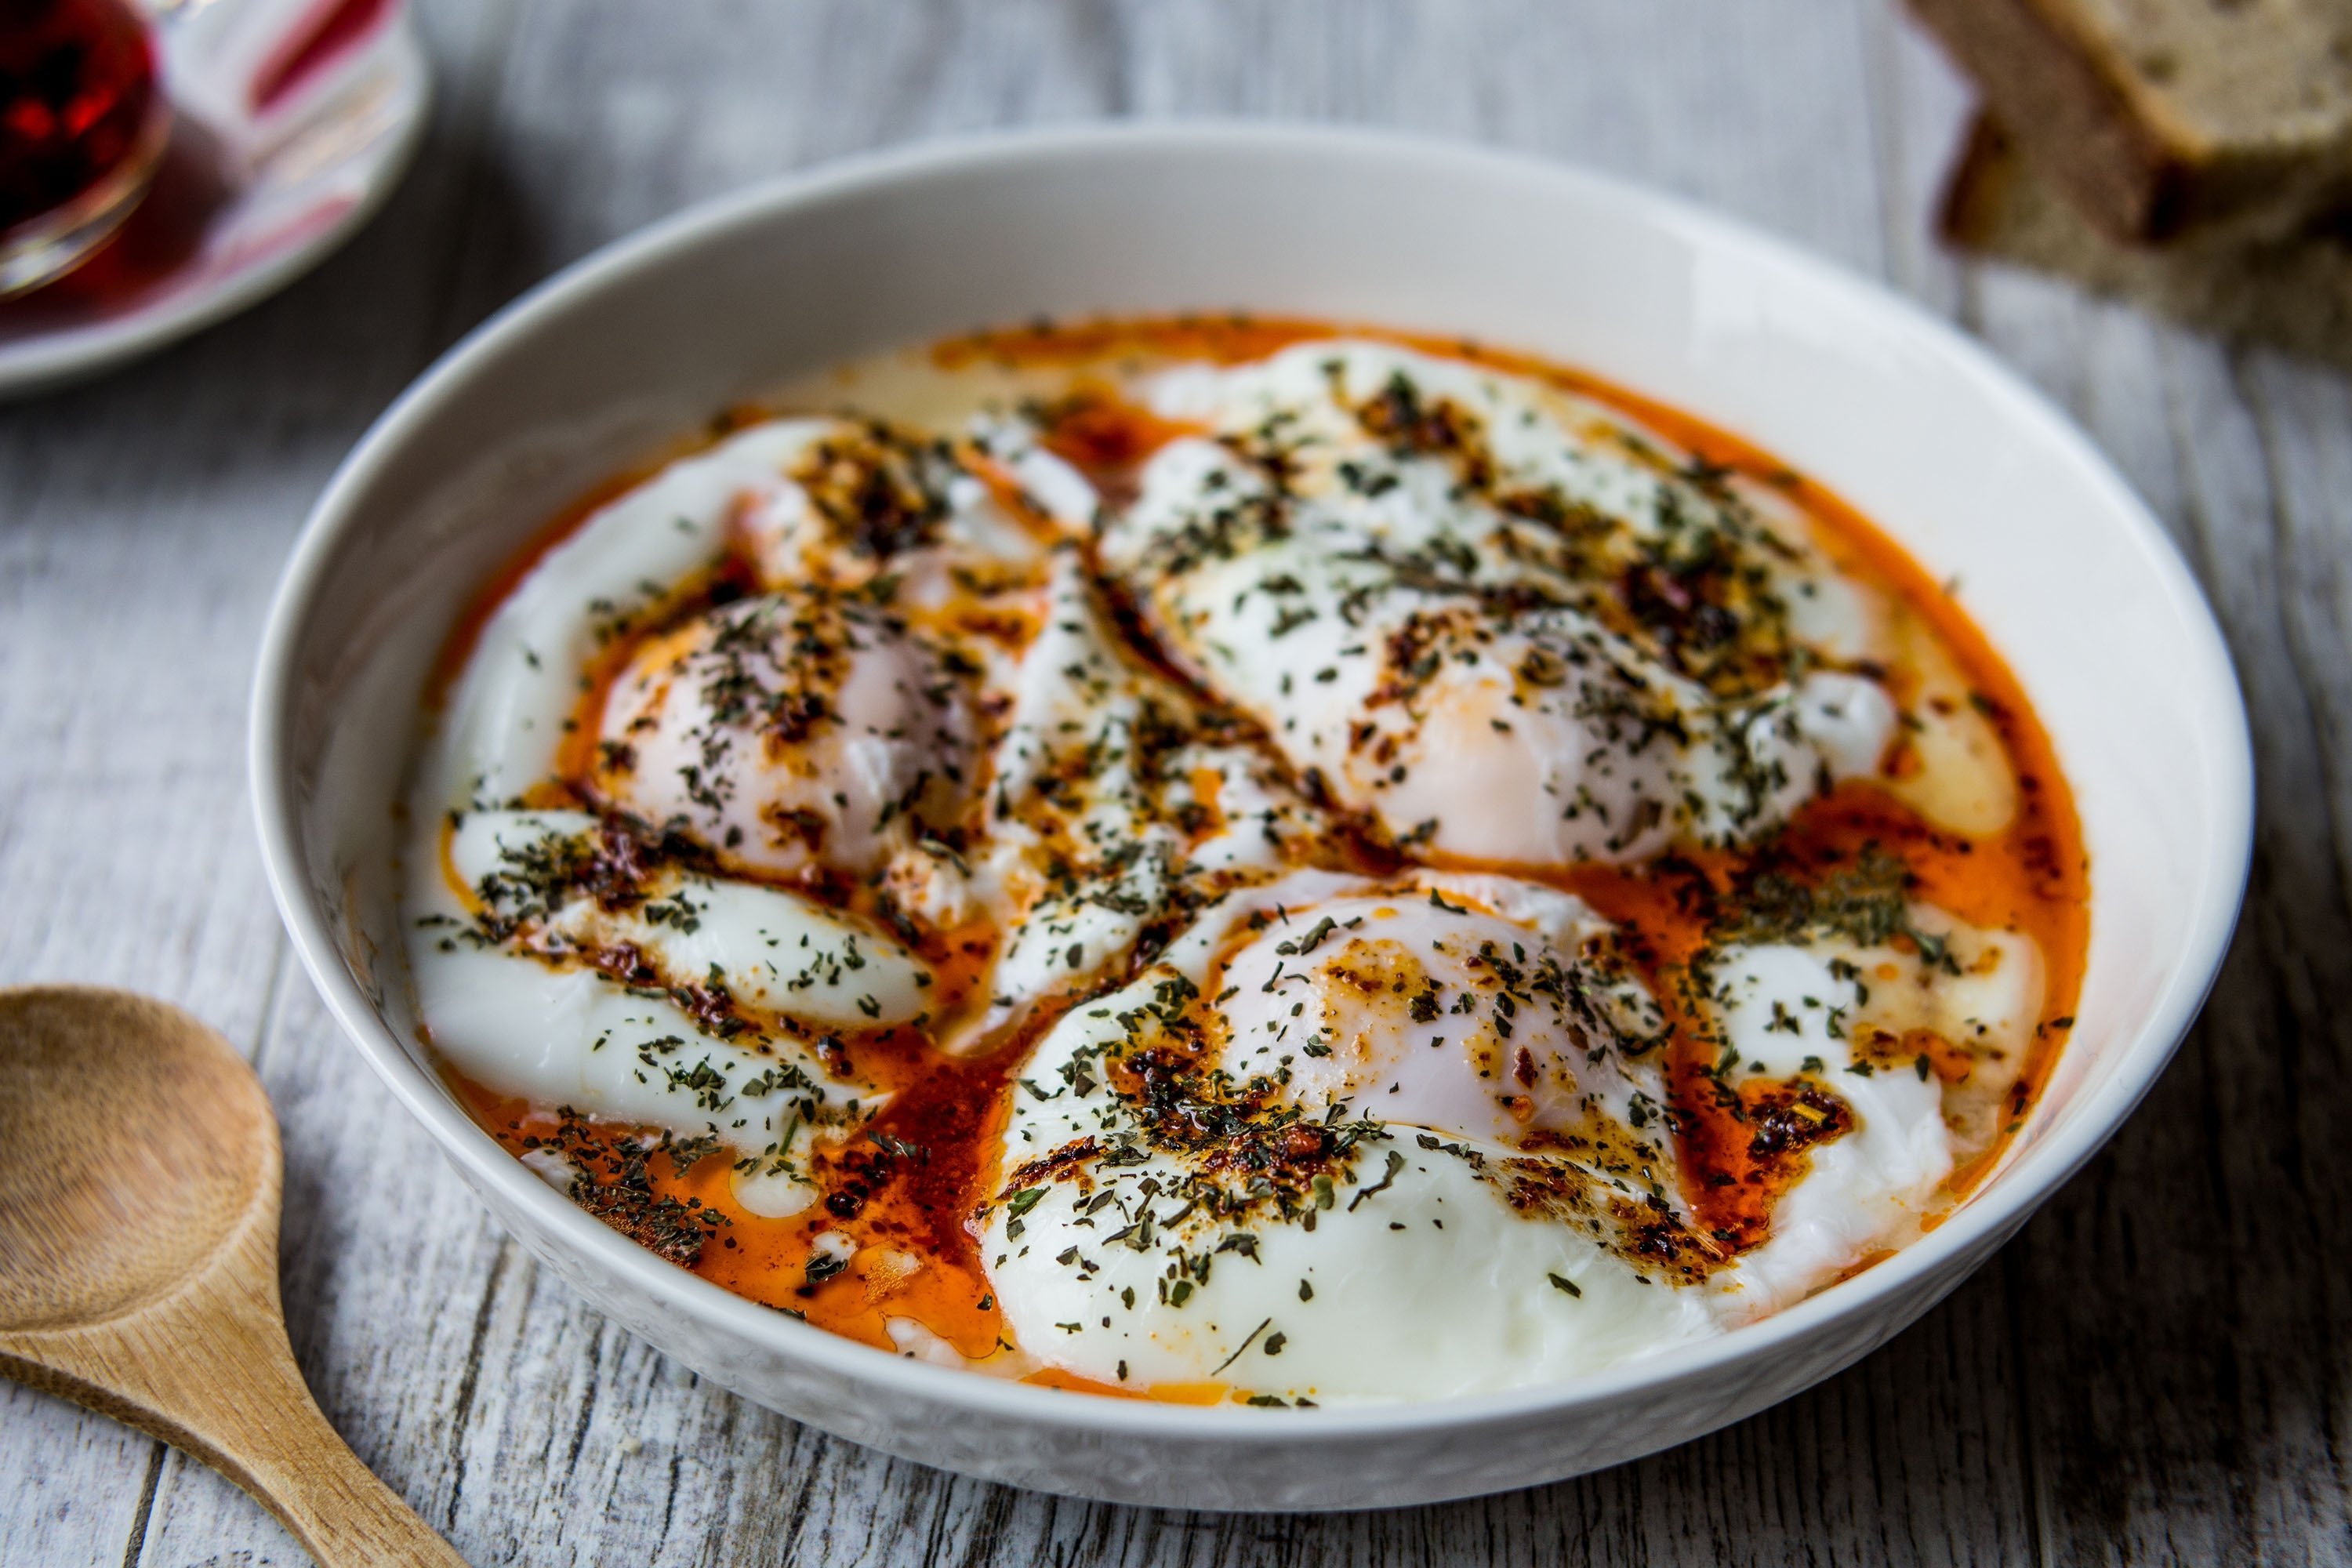 Çılbır is made of poached eggs doused in yogurt and topped off with spicy melted butter. (Shutterstock Photo)